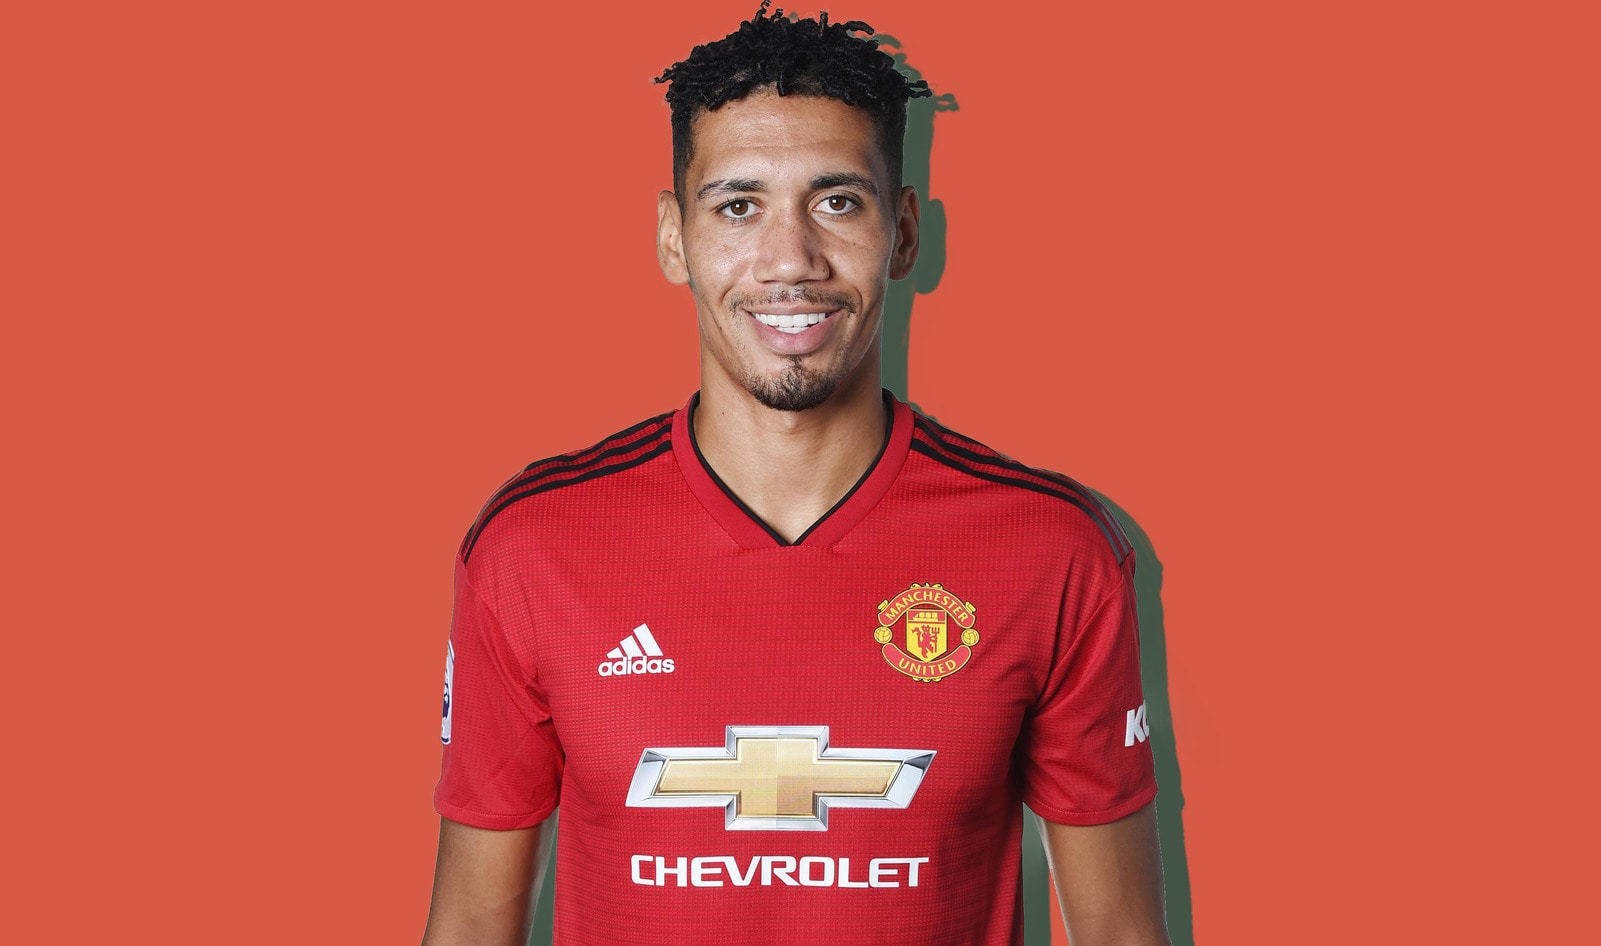 Manchester United Soccer Star Chris Smalling Is Now “Vegan for Life”